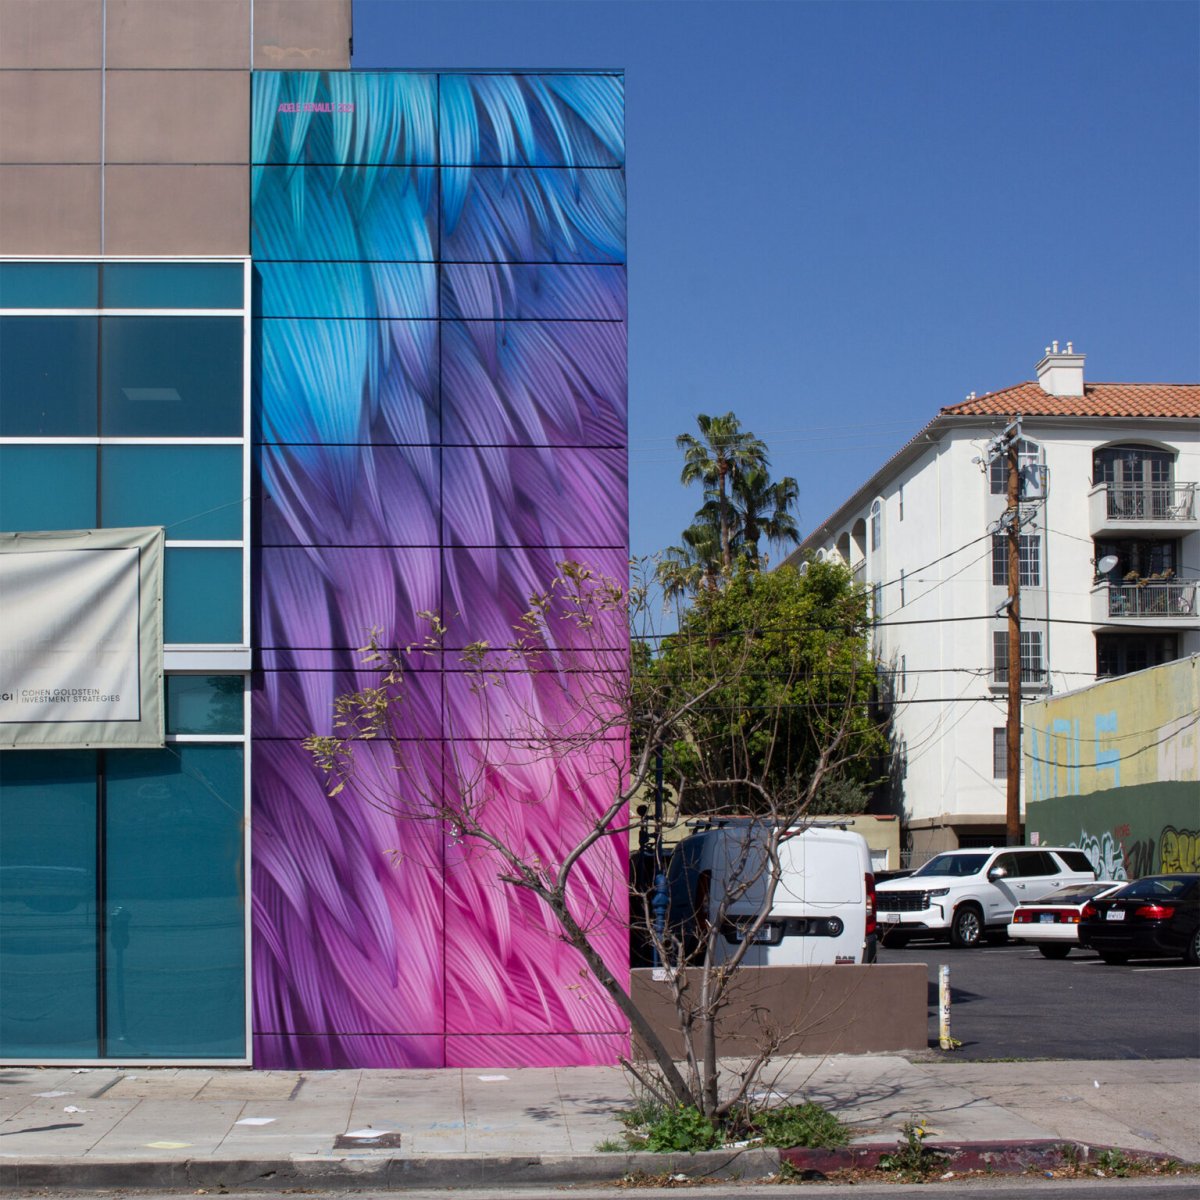 Vibrant Murals Of Colored Feathers By Adele Renault 11